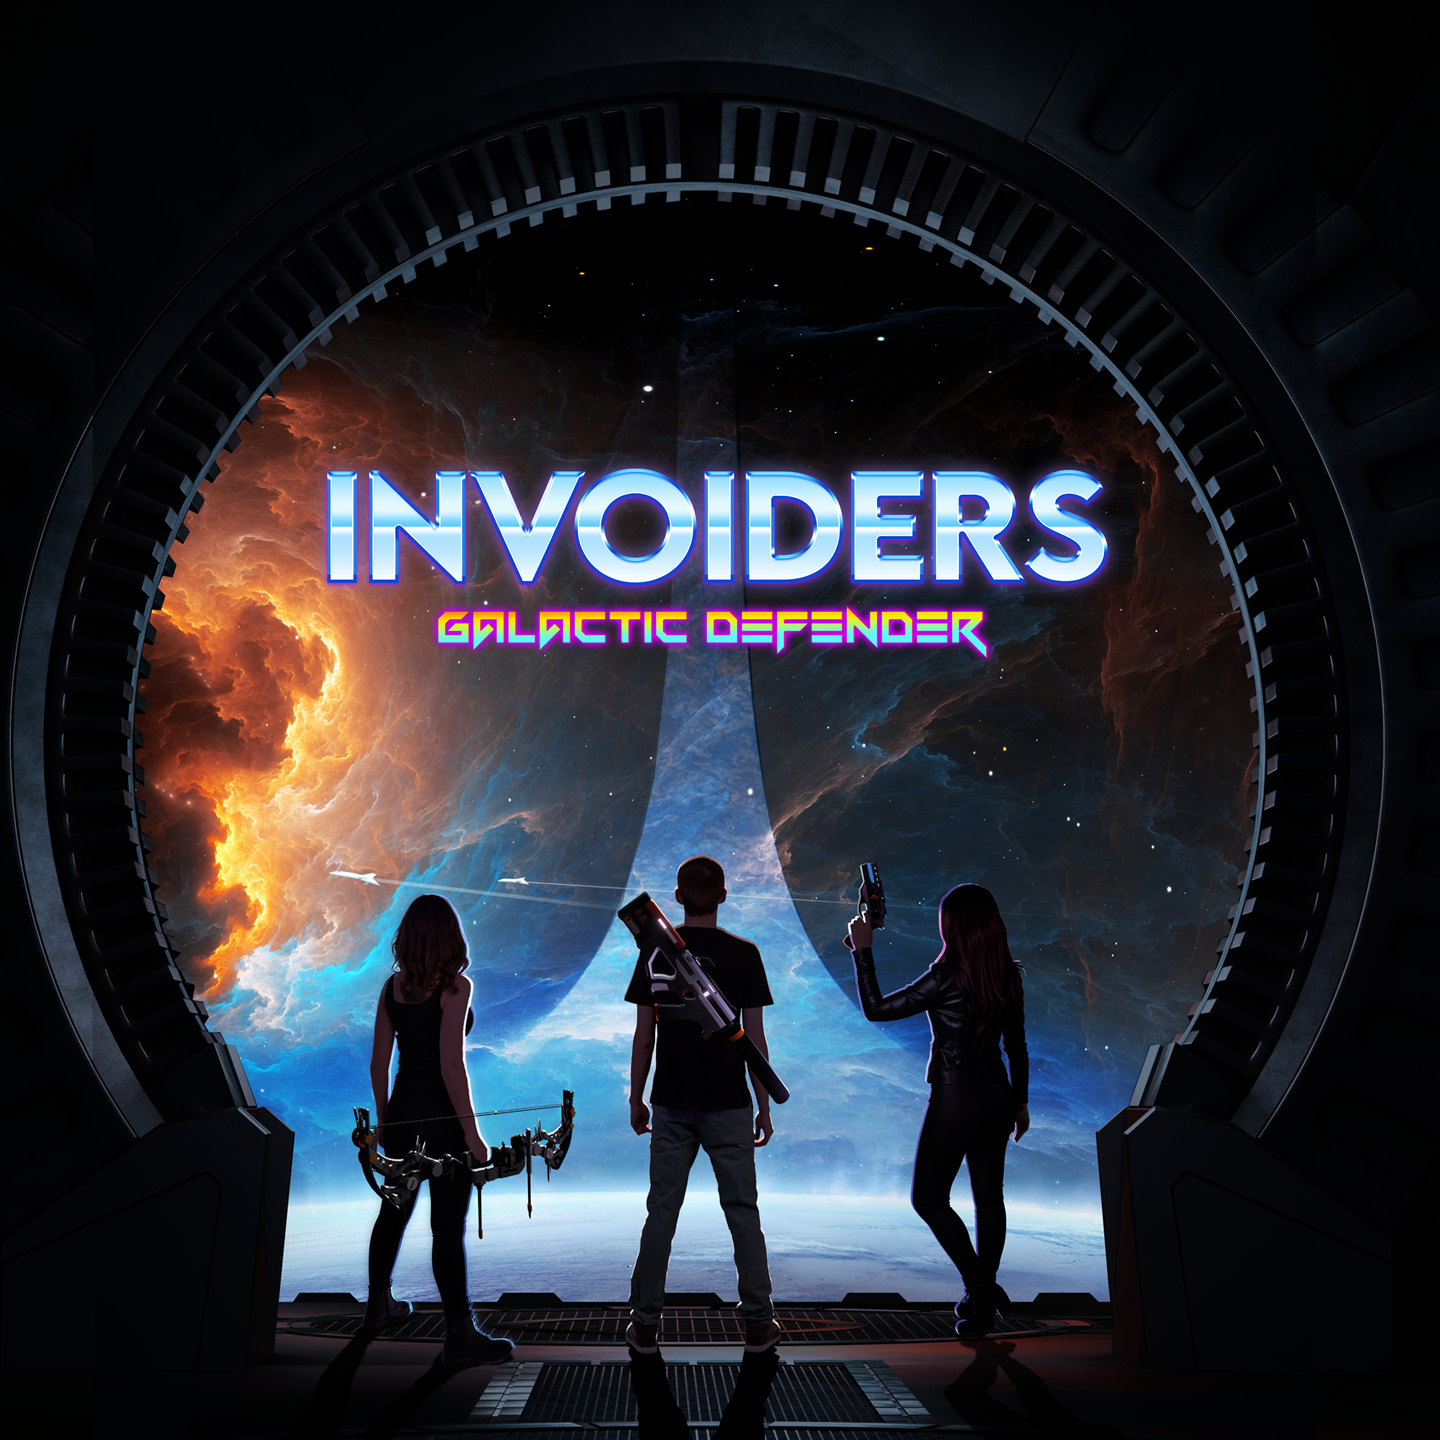 INVOIDERS GALACTIC DEFENDER - A Superb Tower Defense game in VR! // Quest 2  // AppLabs 